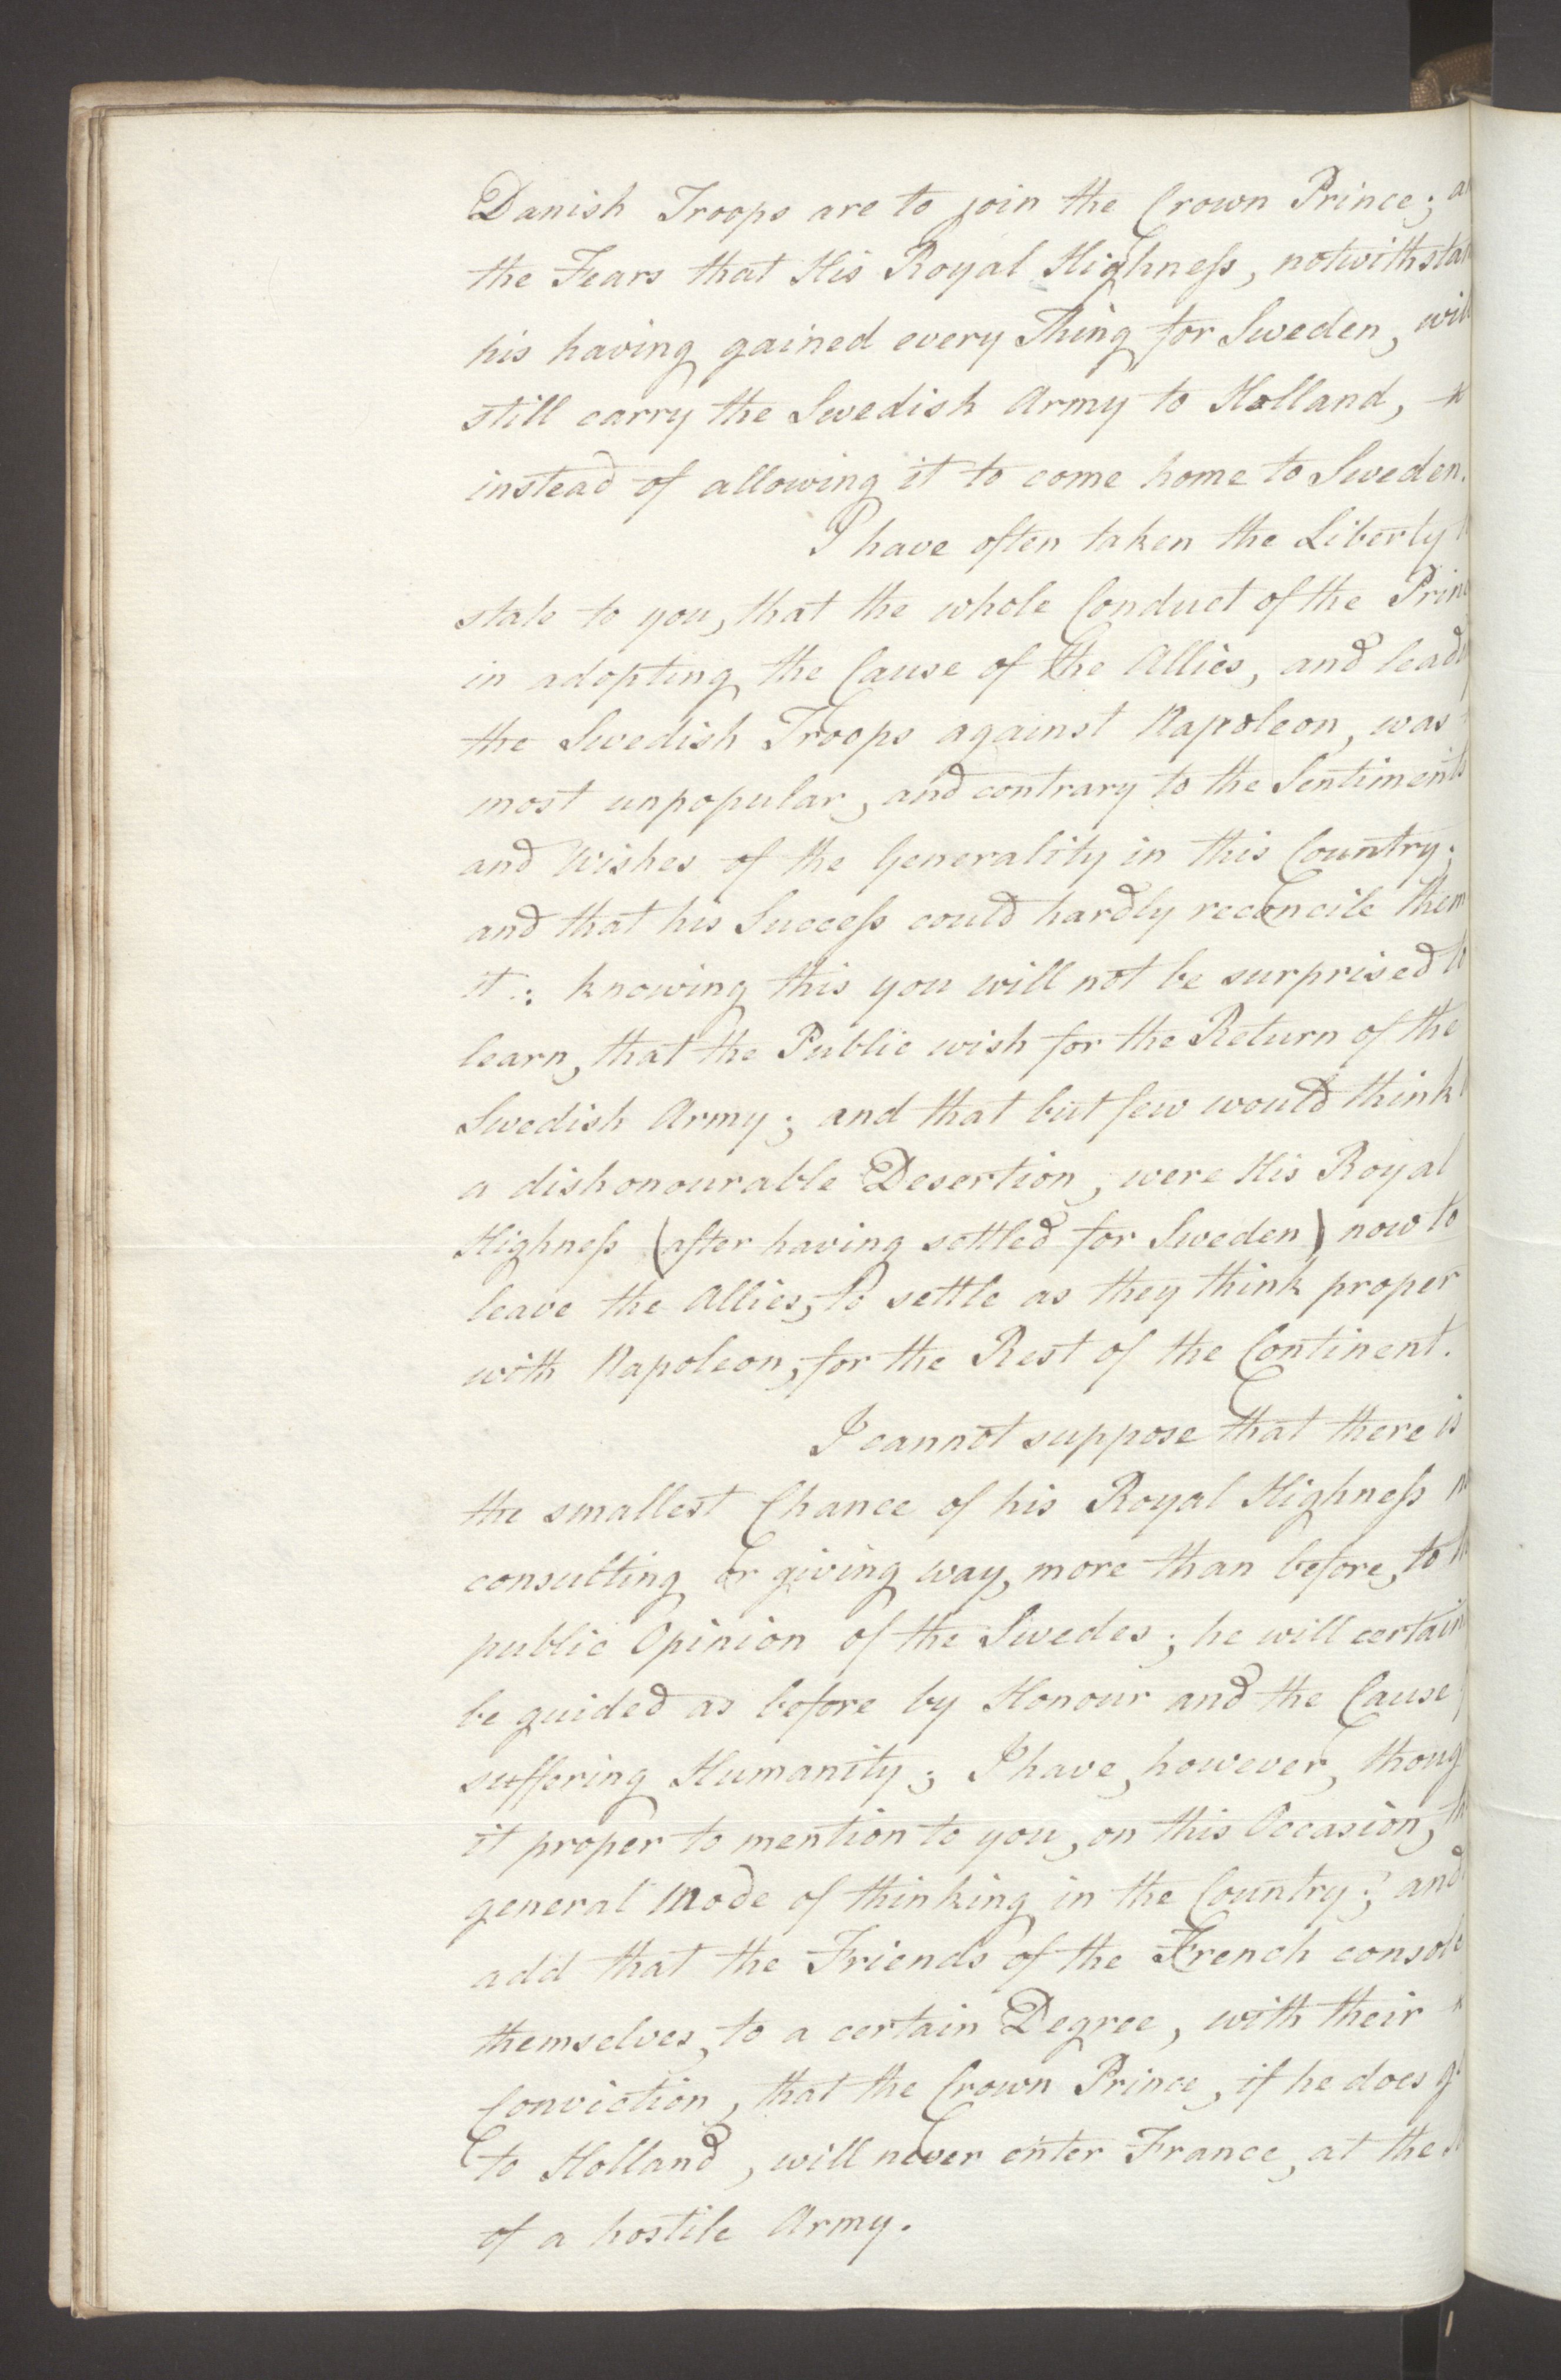 Foreign Office*, UKA/-/FO 38/16: Sir C. Gordon. Reports from Malmö, Jonkoping, and Helsingborg, 1814, p. 15